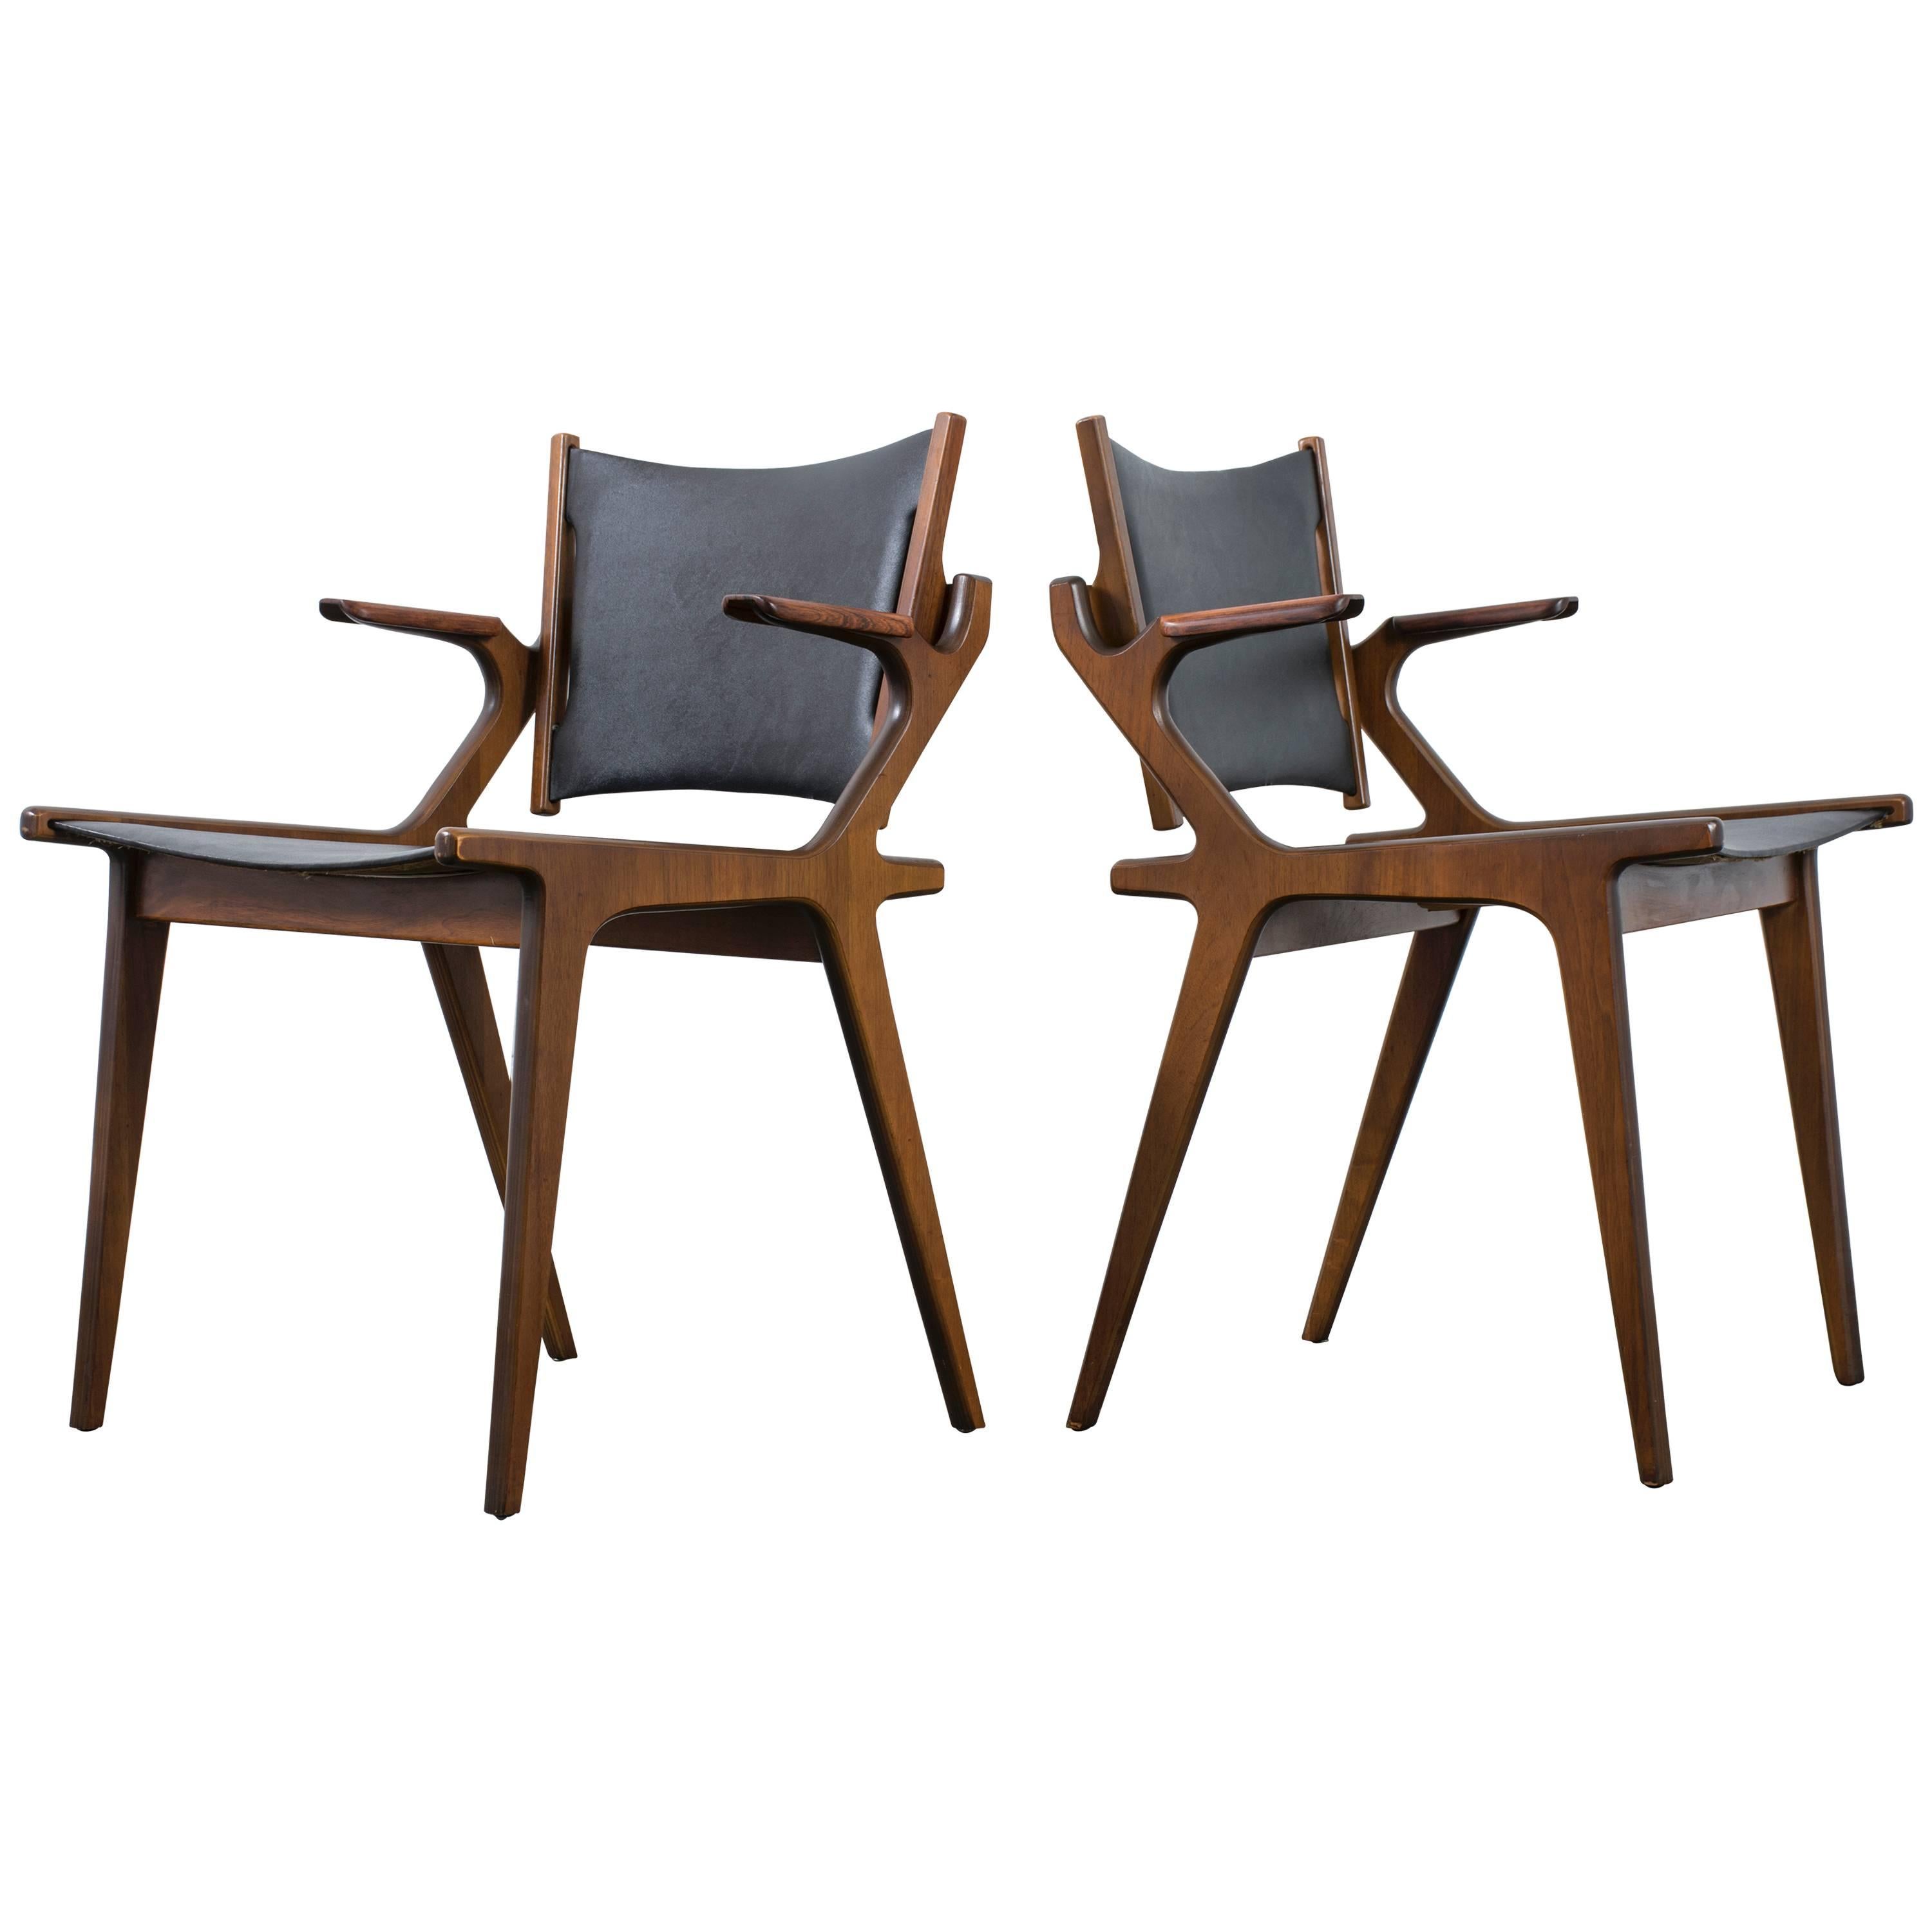 Pair of Vintage Mid-Century Chairs by Richard Thompson for Glenn of California